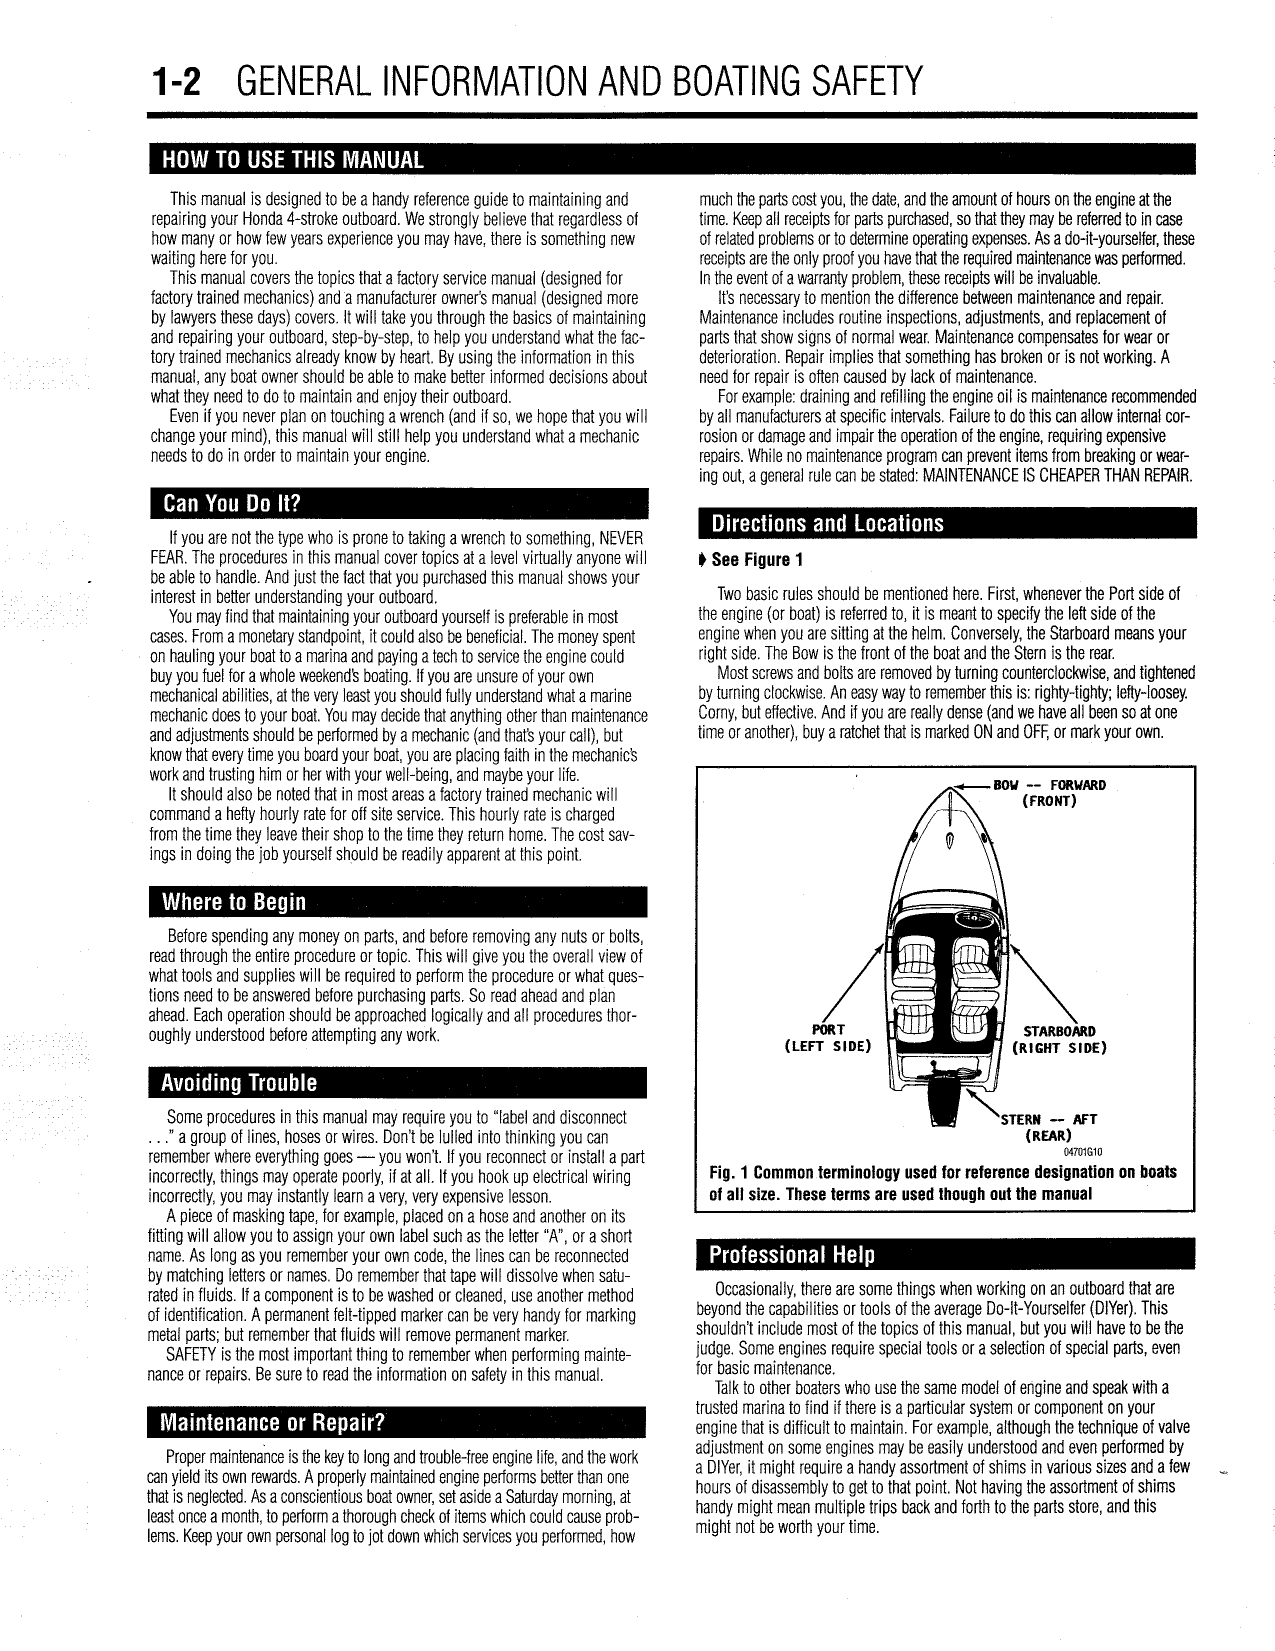 1978-2001 Honda 2hp-130hp outboard engine service manual Preview image 4